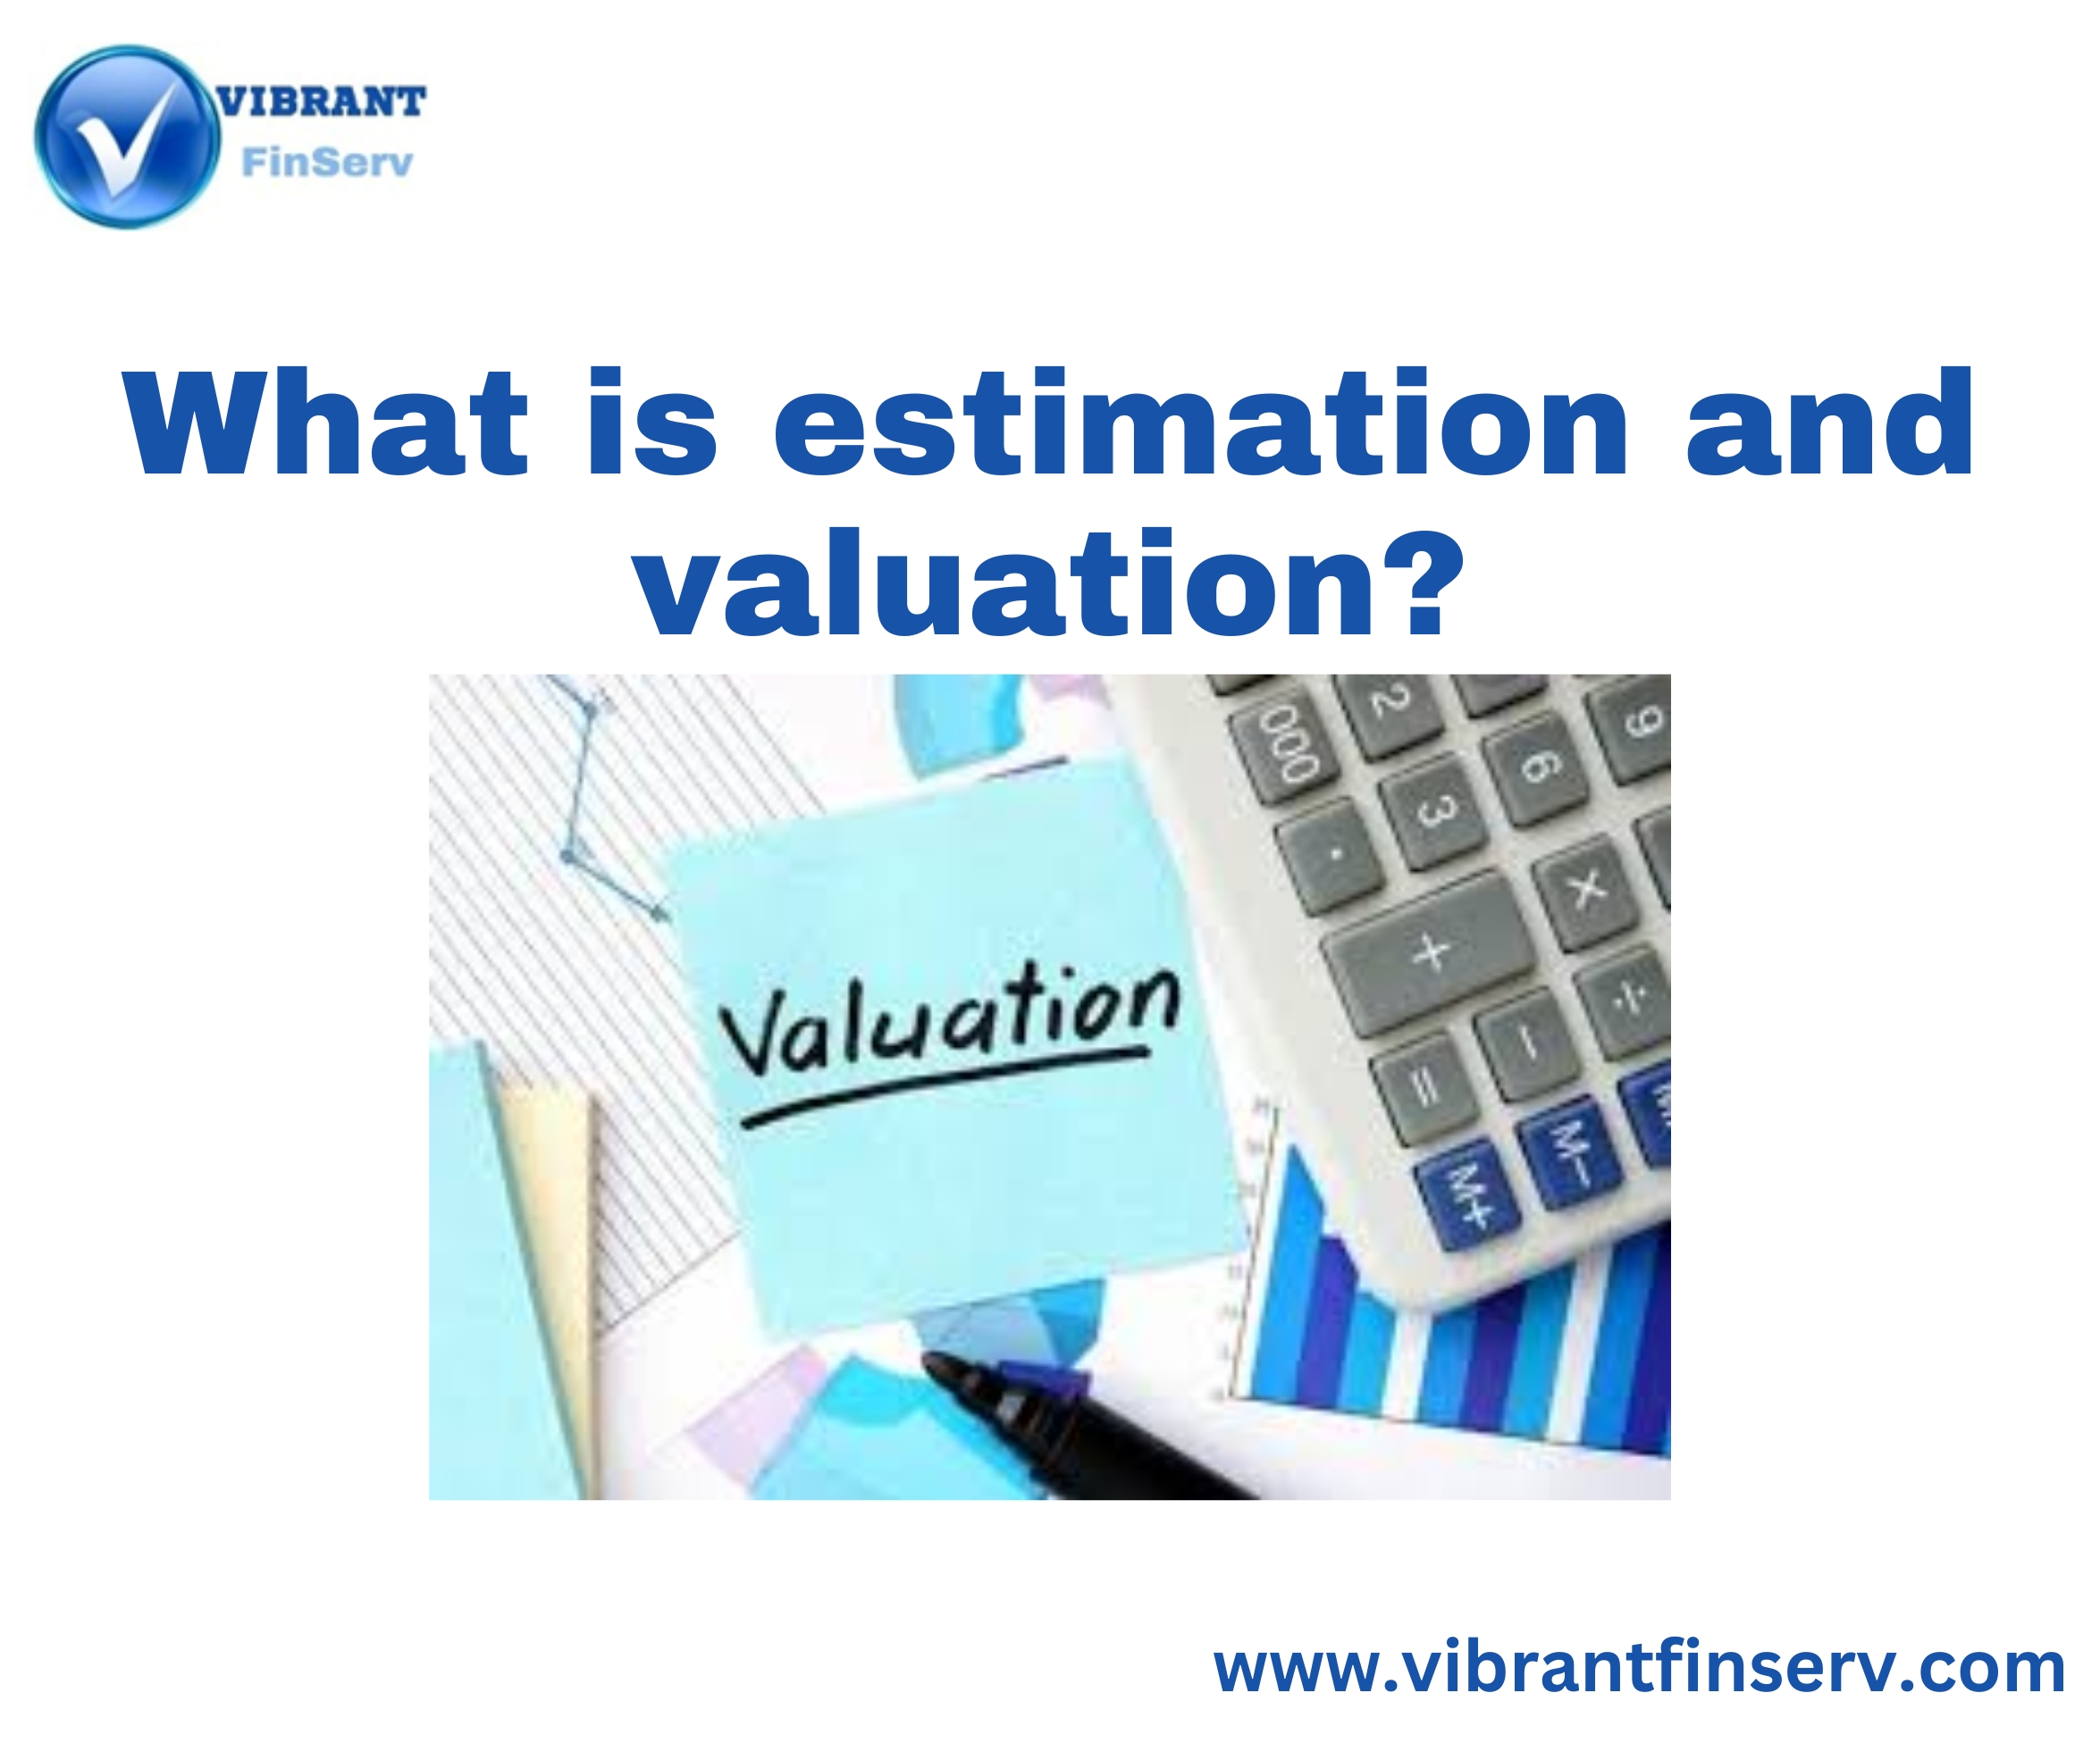 Estimation and Valuation